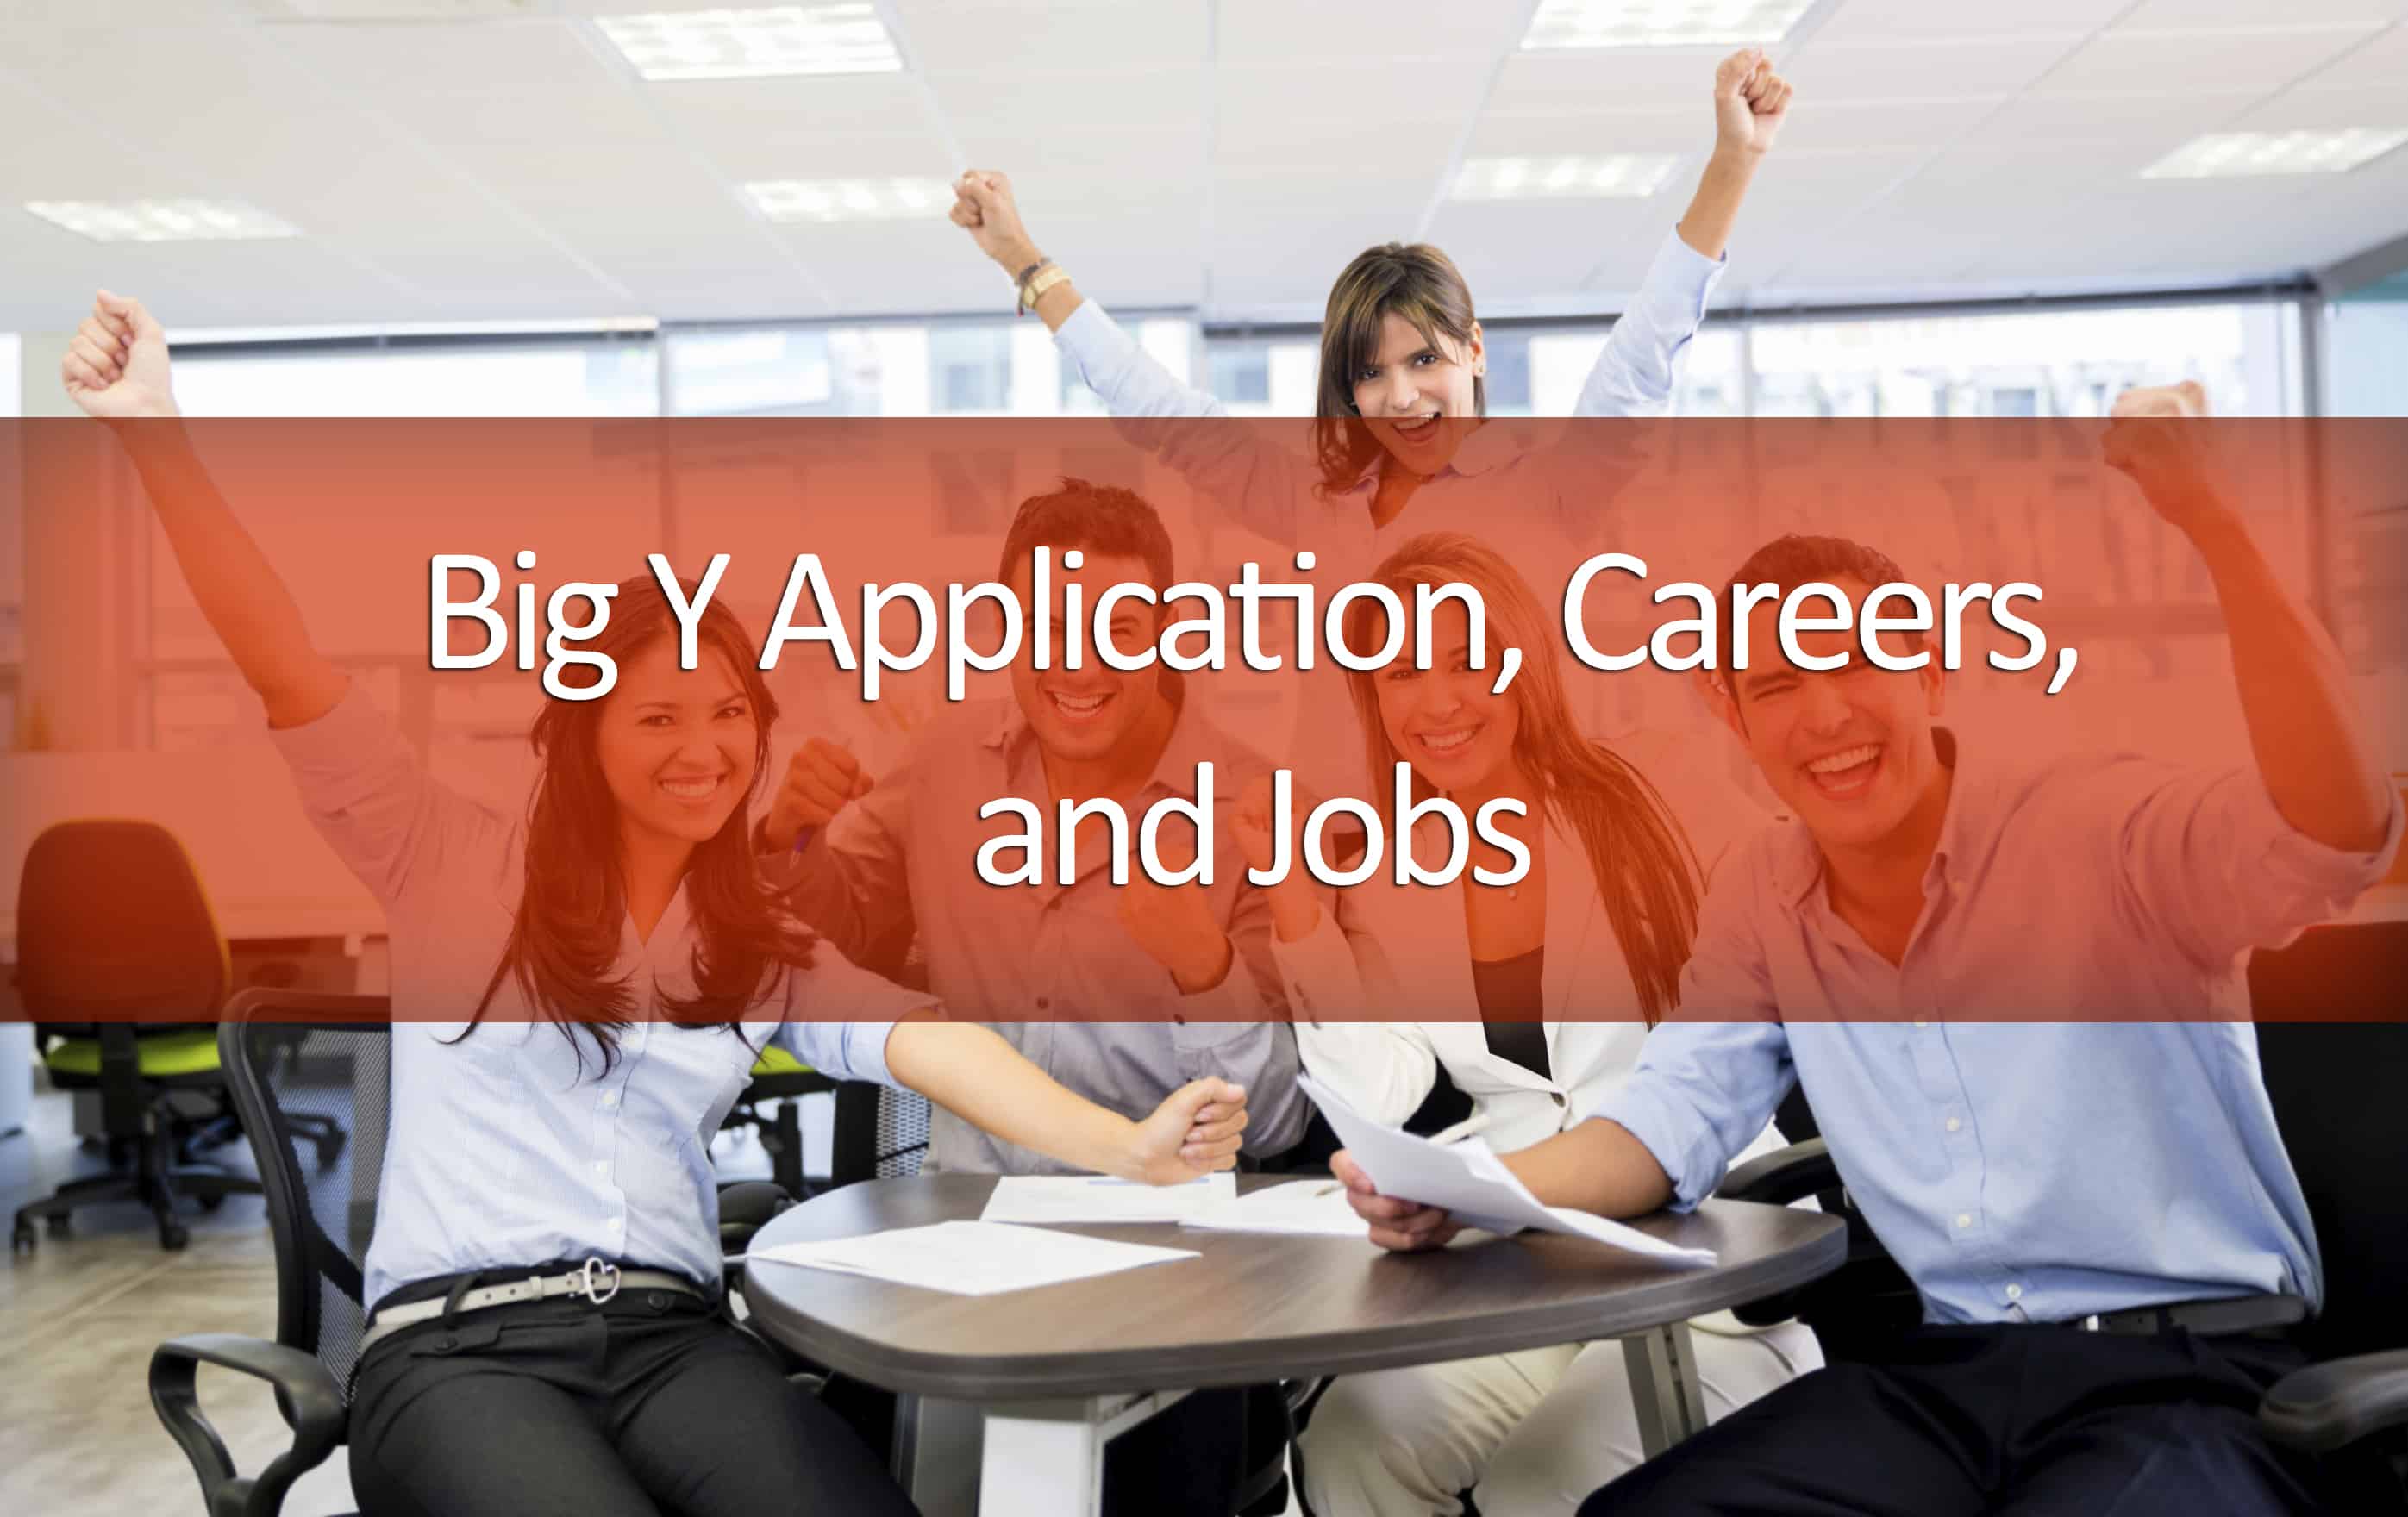 Big Y Application, Careers, and Jobs – Everything You Need To Know